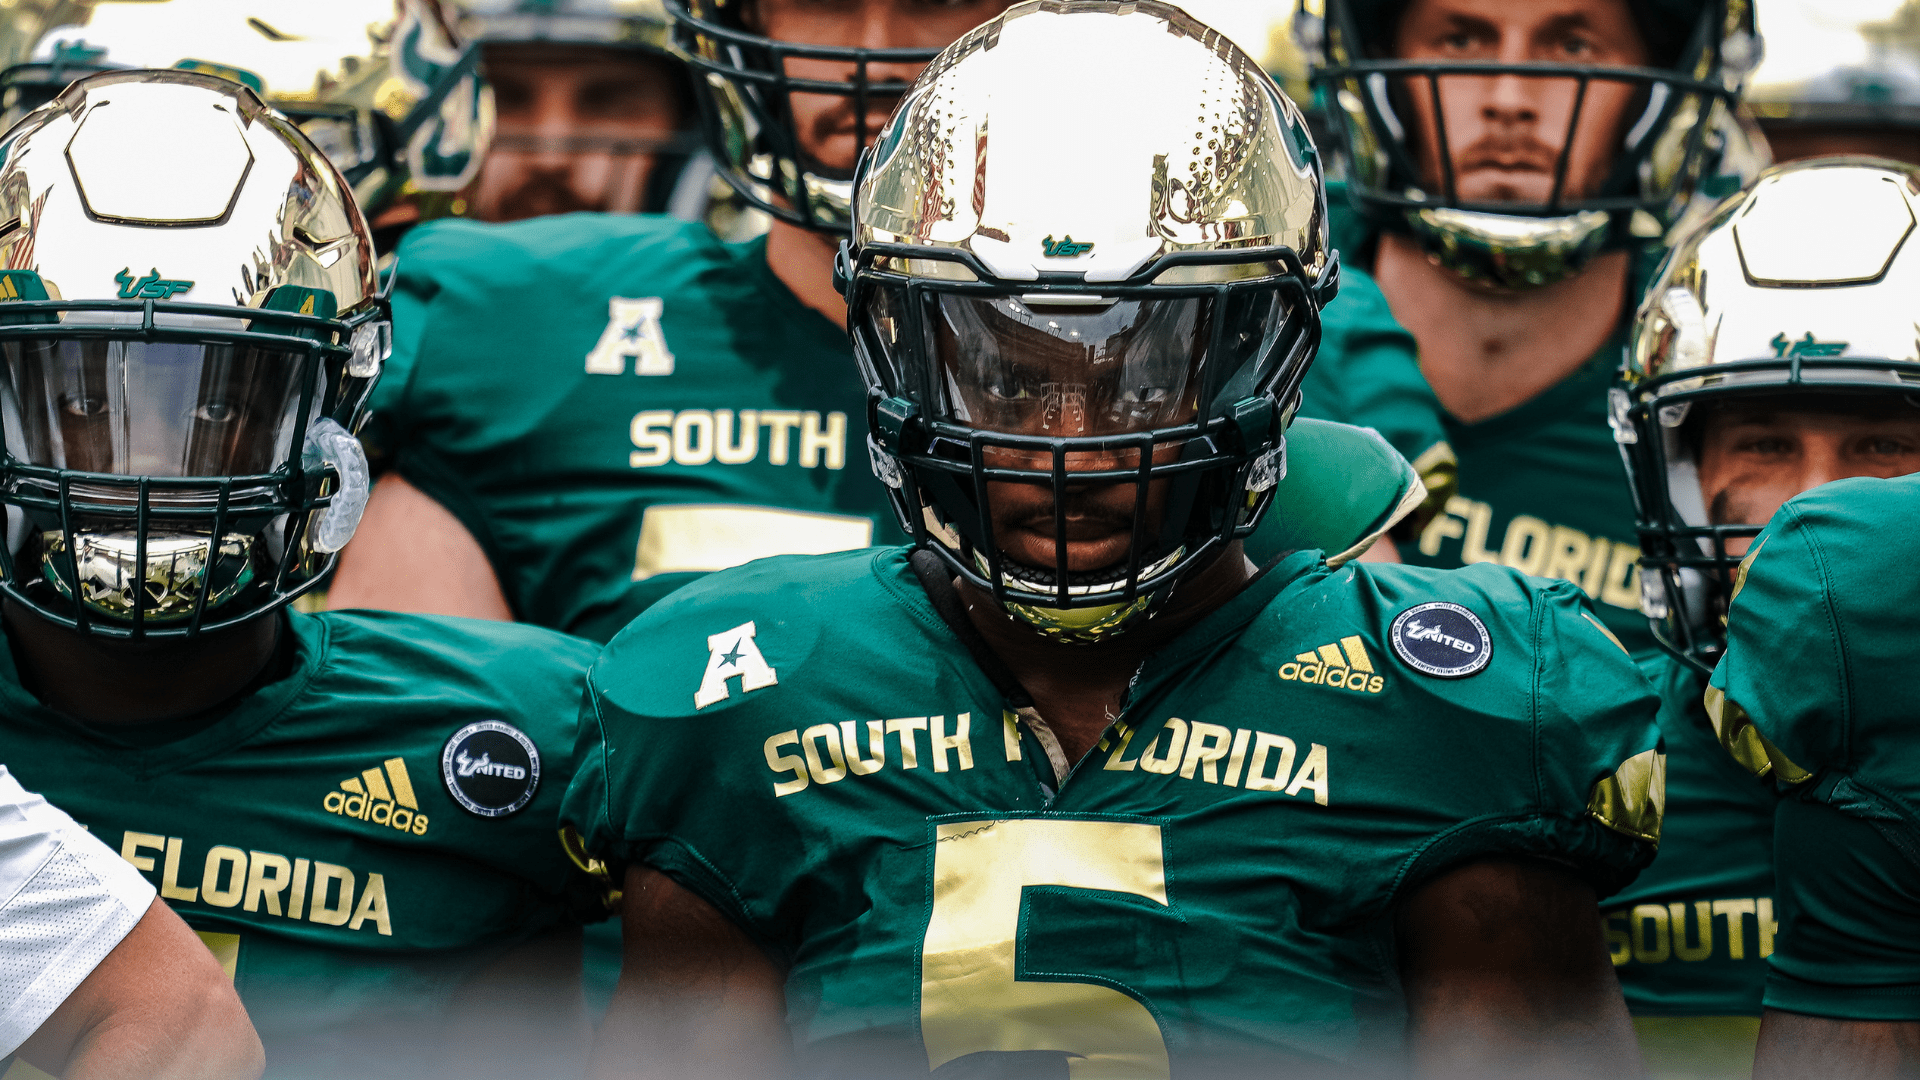 usf 2023 season ticket schedule - That's So Tampa